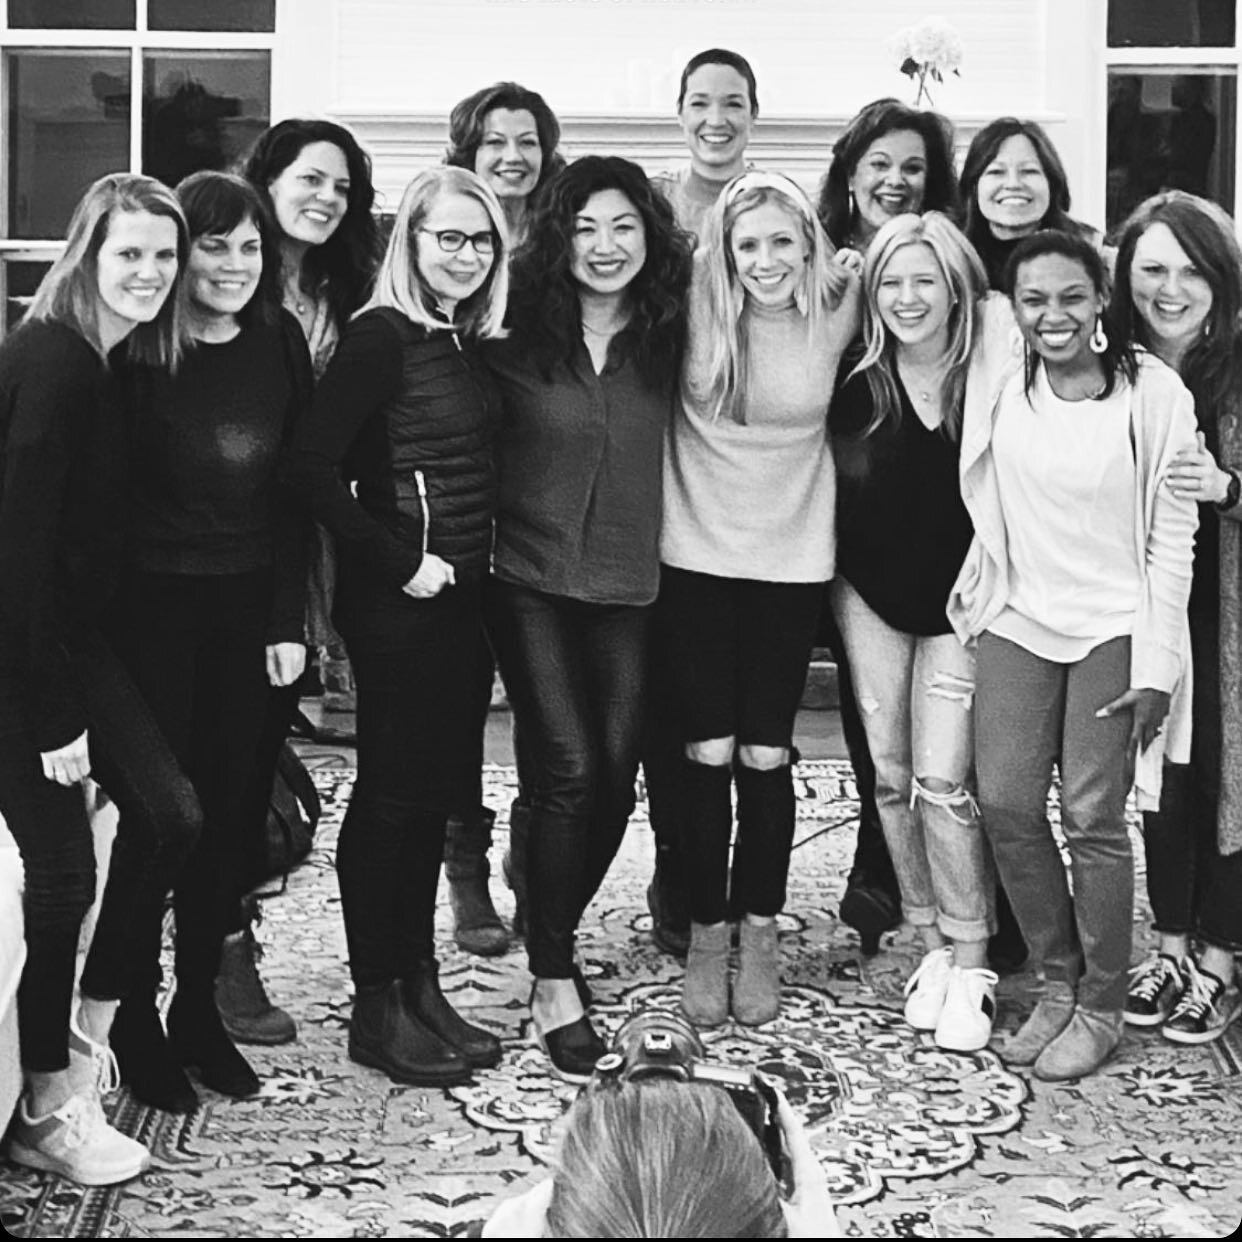 That&rsquo;s a wrap! Another @faithfulsongs retreat is done 💛 Grateful for the hope-filled stories that continue to reveal themselves, and the amazingly talented women who shape them into songs! #faithfulsongs @integritymusic @compassion